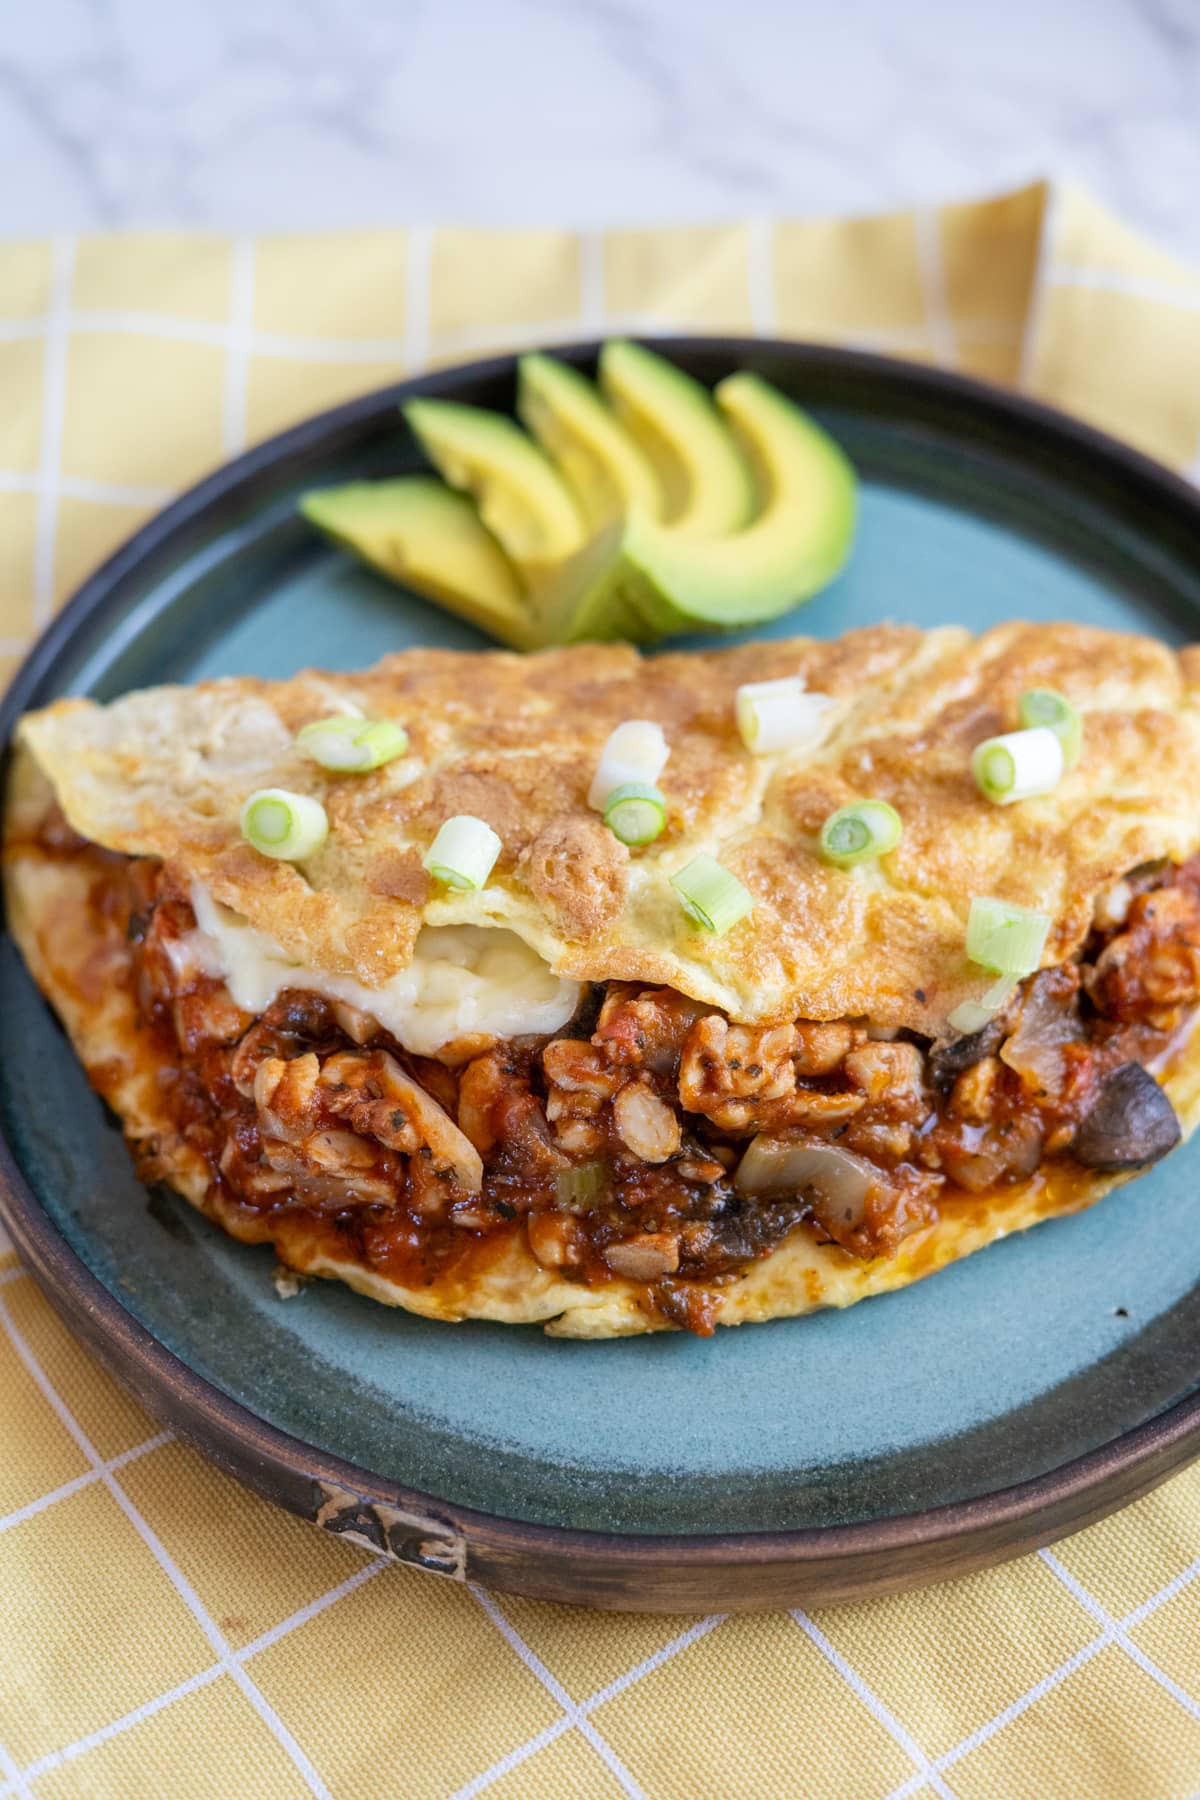 A chili omelette with avocado on a plate.